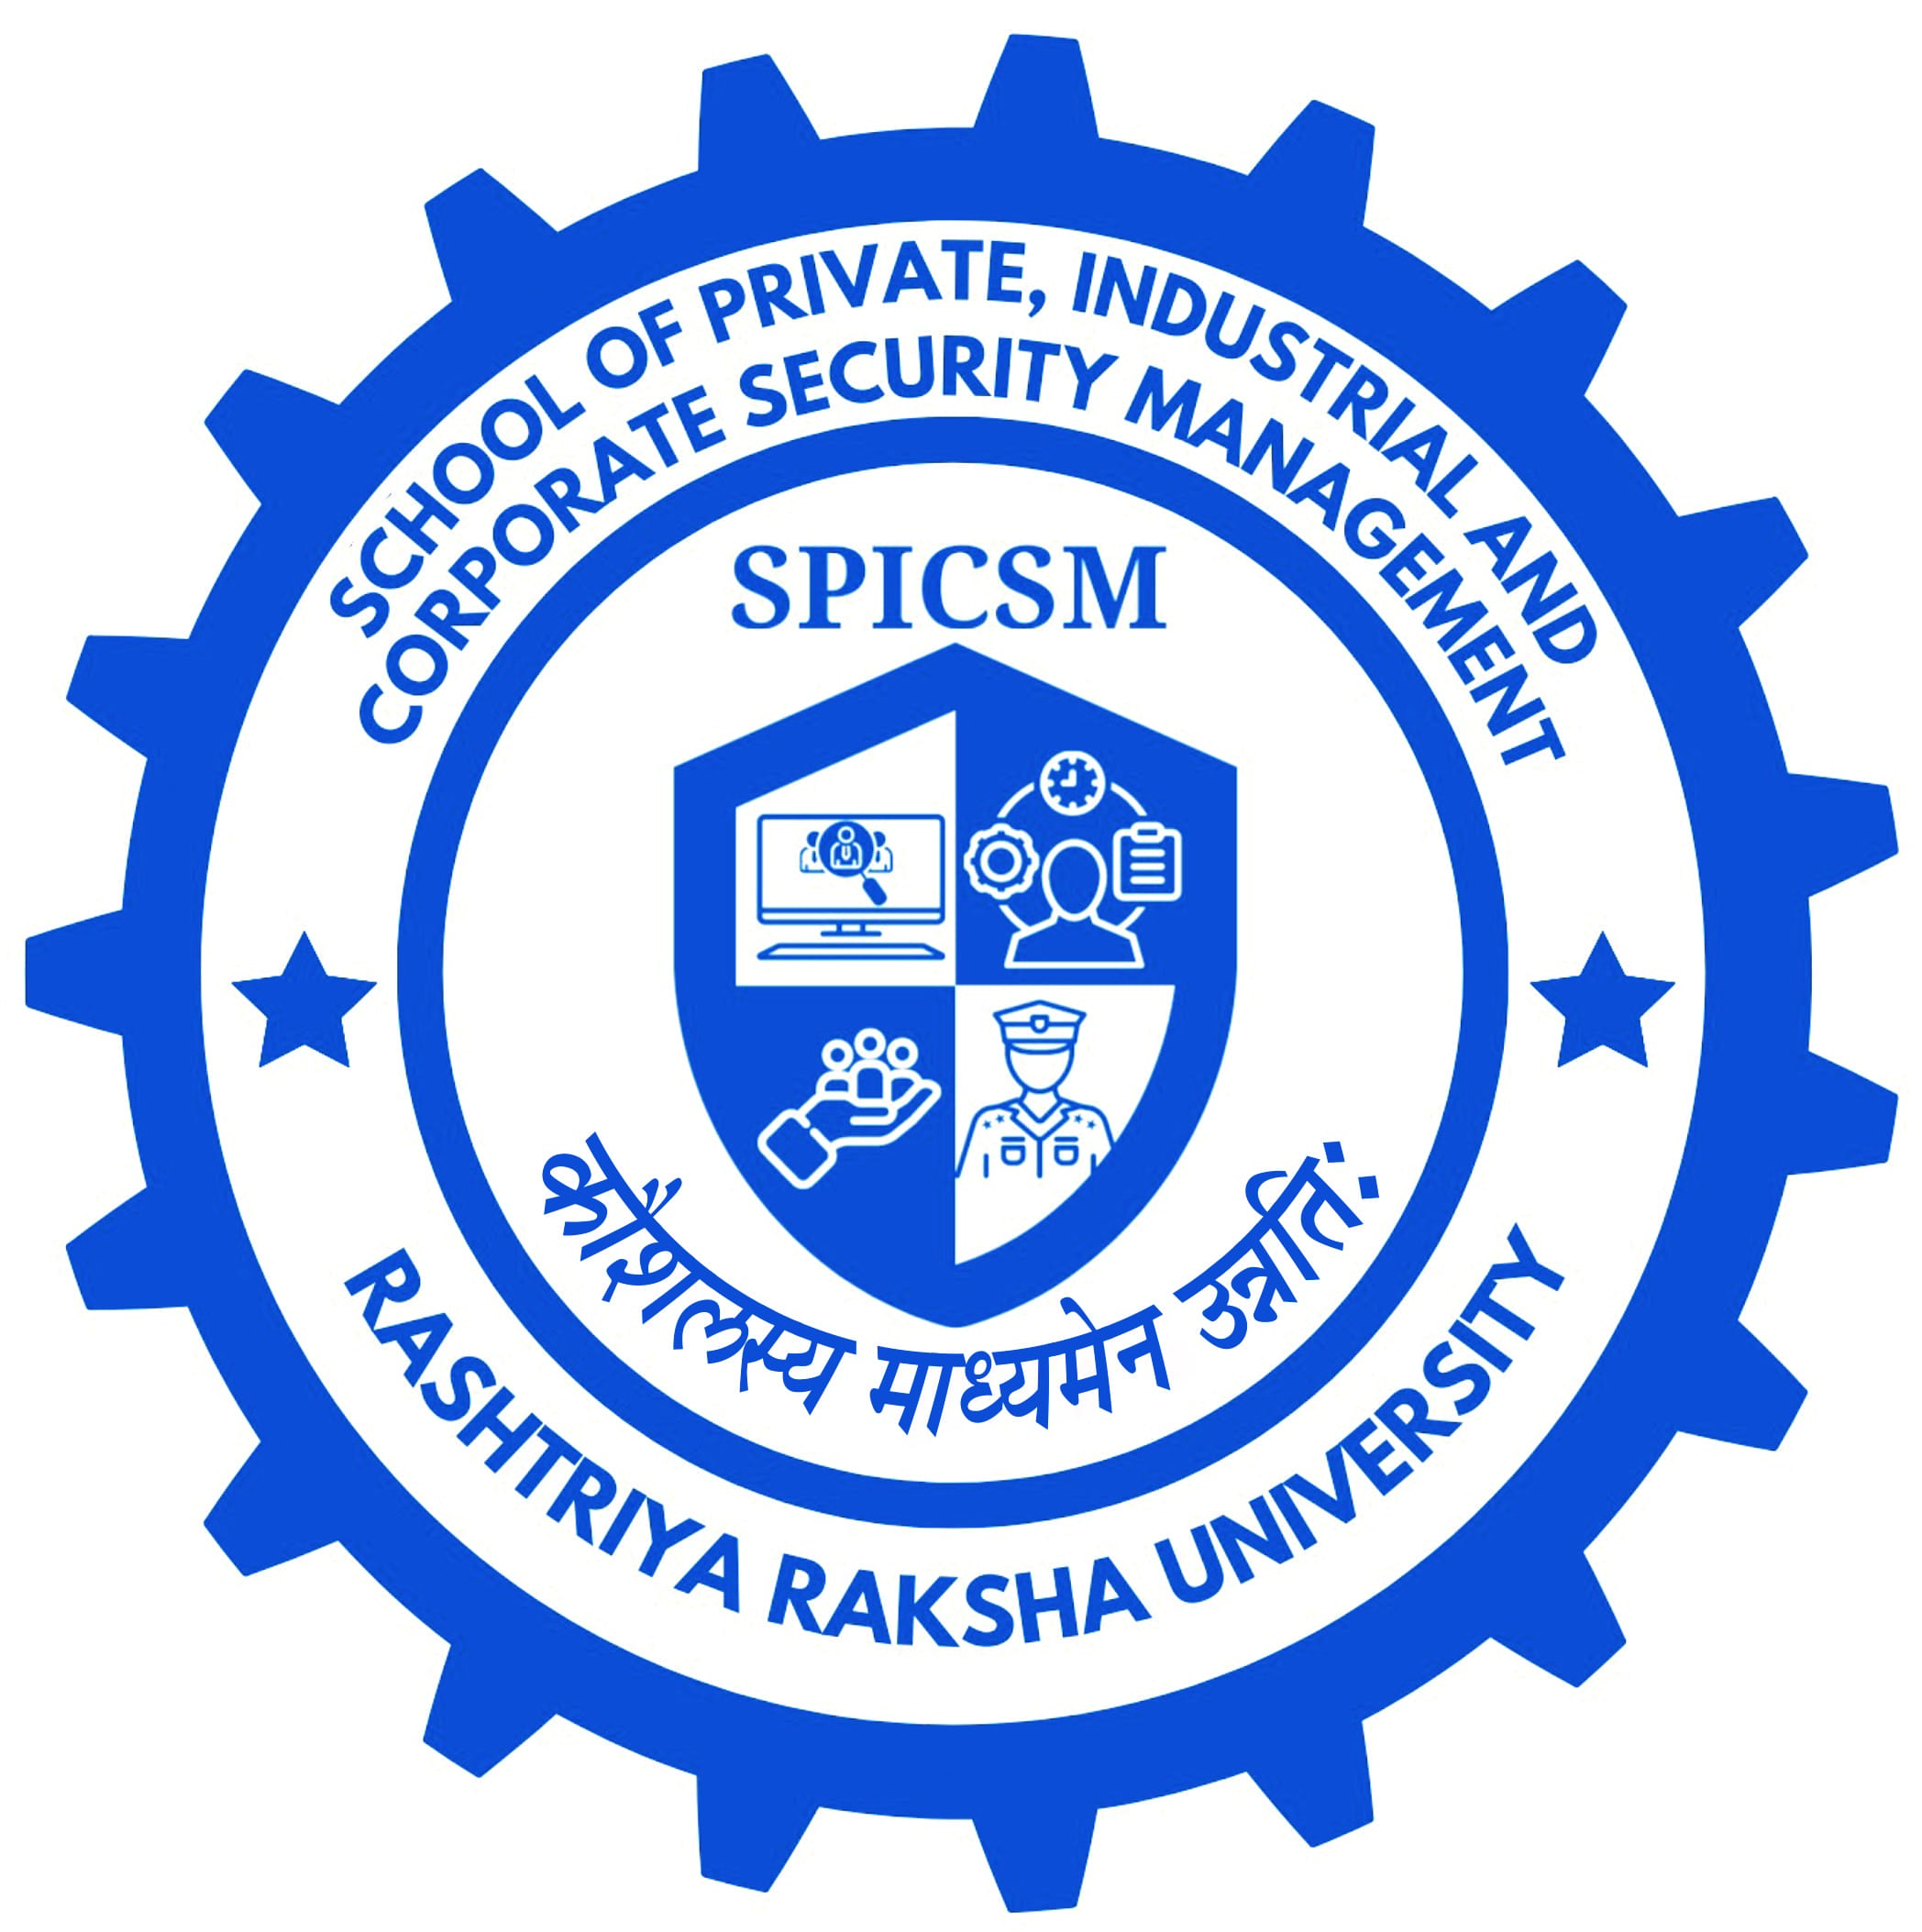 School of Private, Industrial and Corporate Security Management (SPICSM)